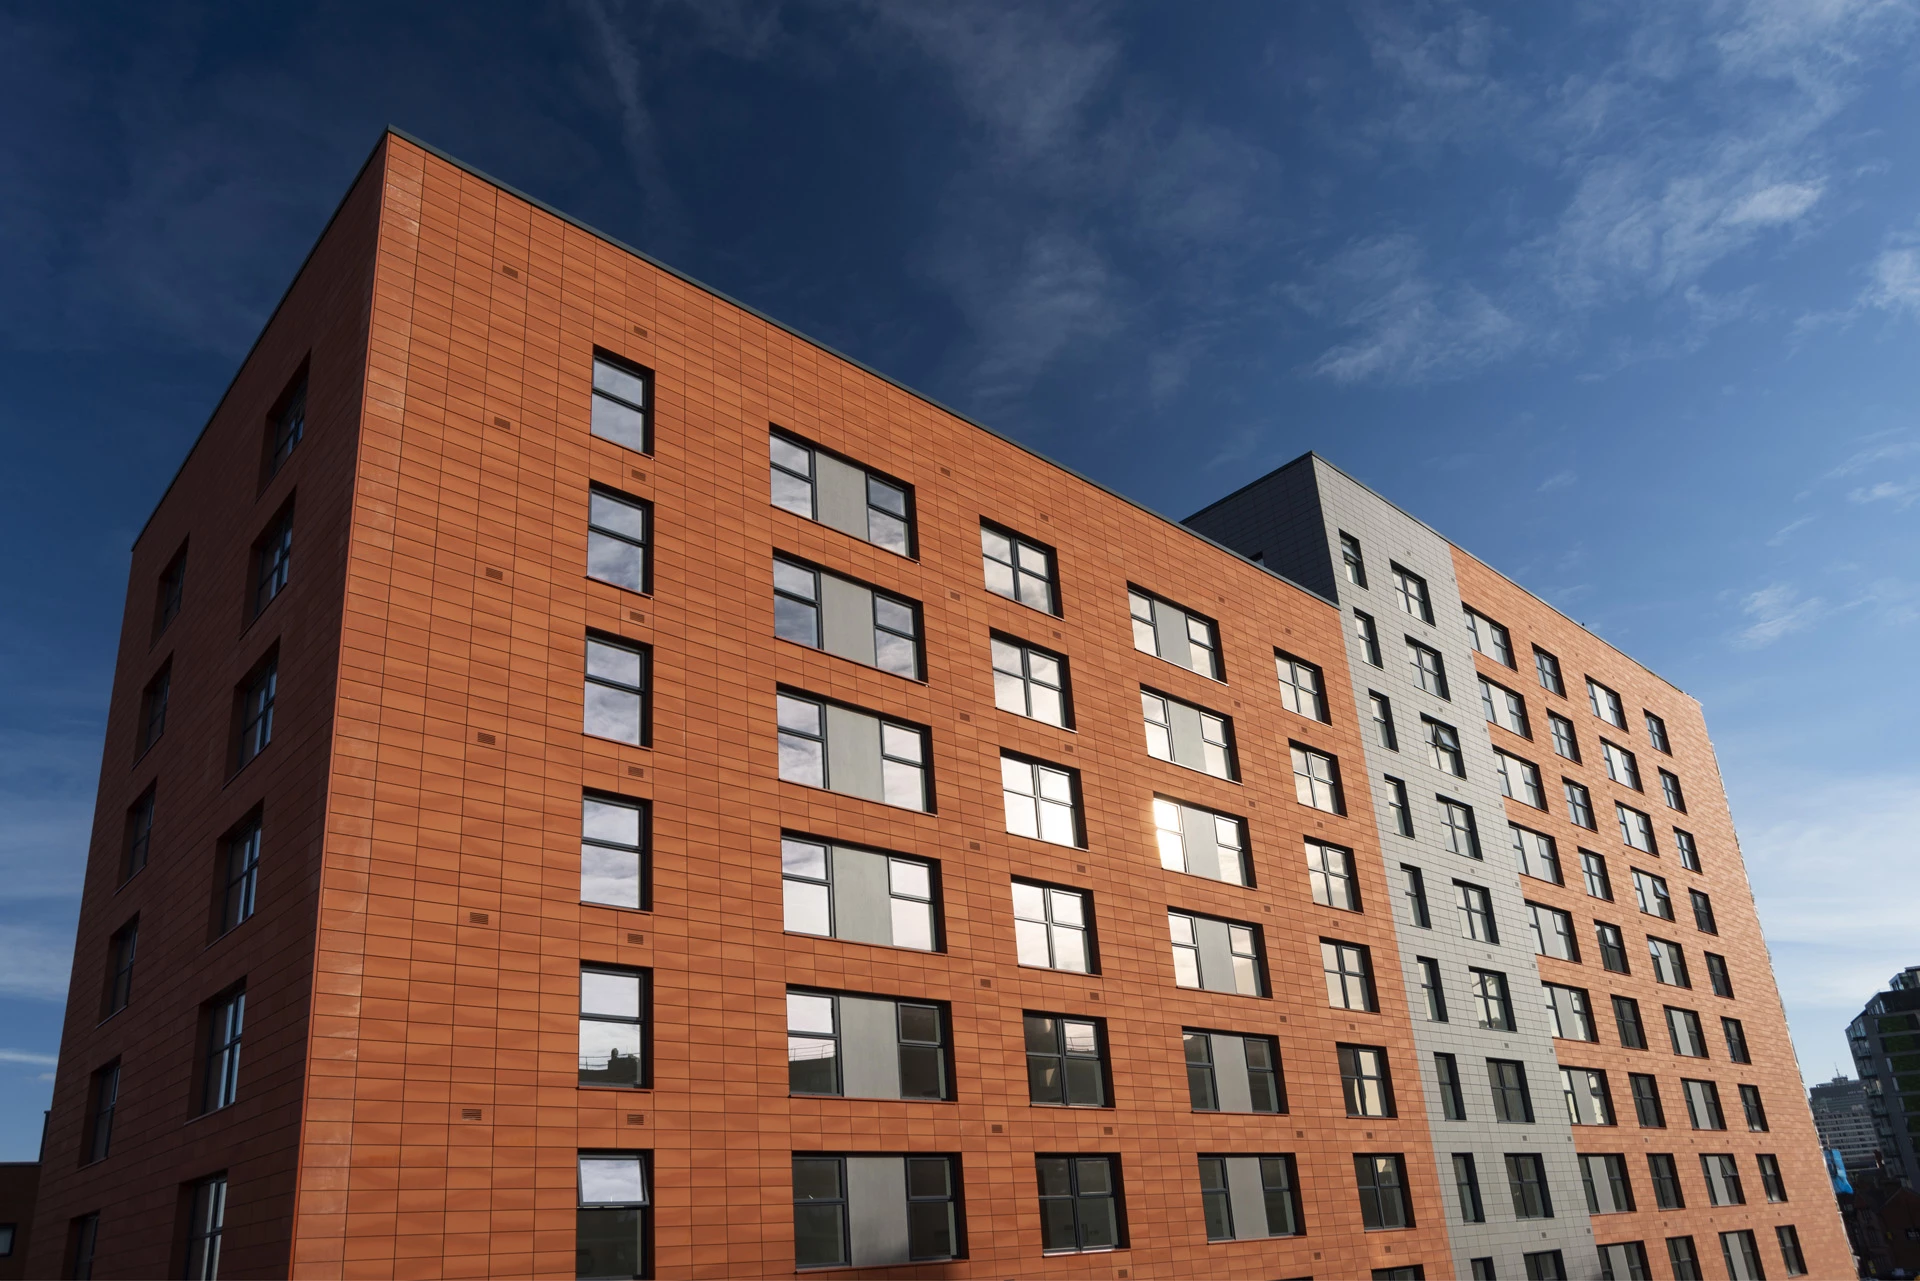 The new Artifex building by Salix Homes will bring 108 new affordable homes to Salford.